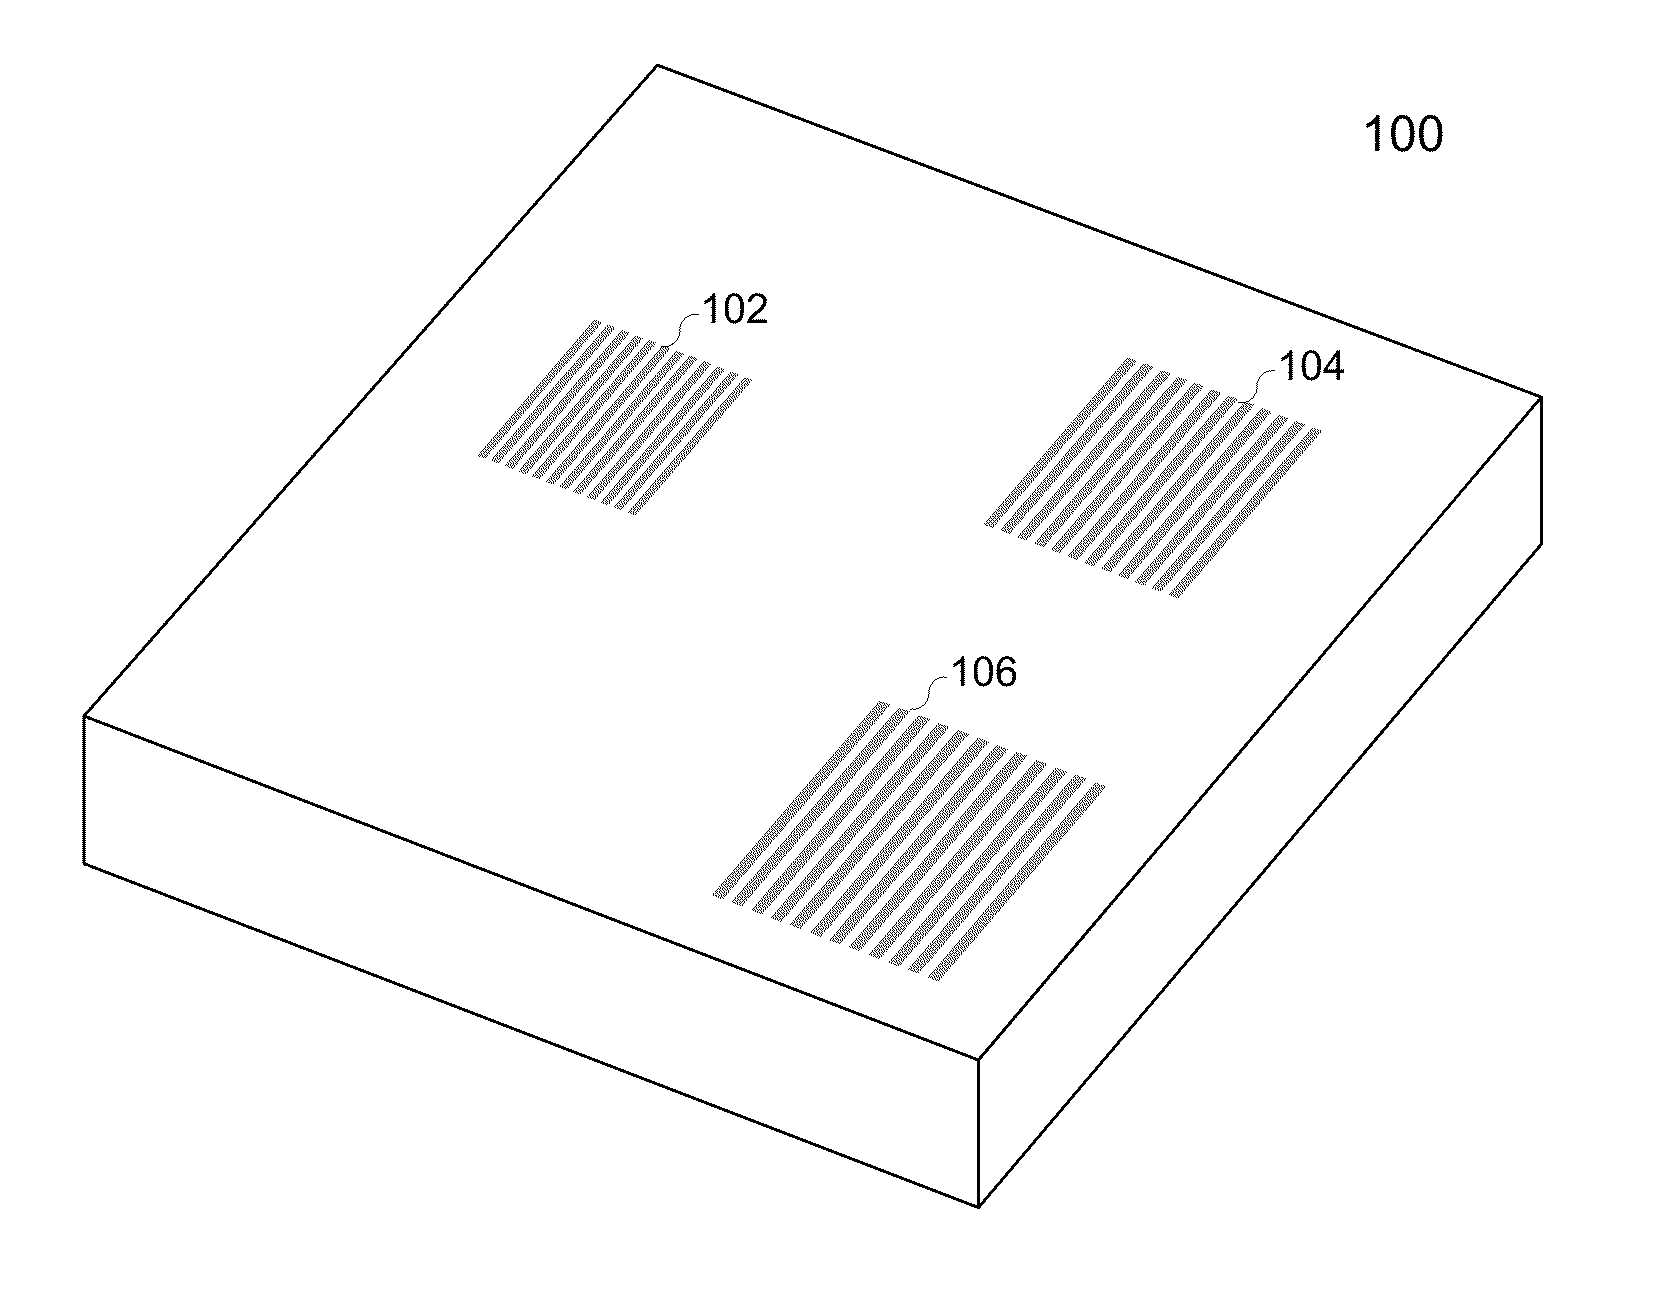 Tamper detection countermeasures to deter physical attack on a security asic